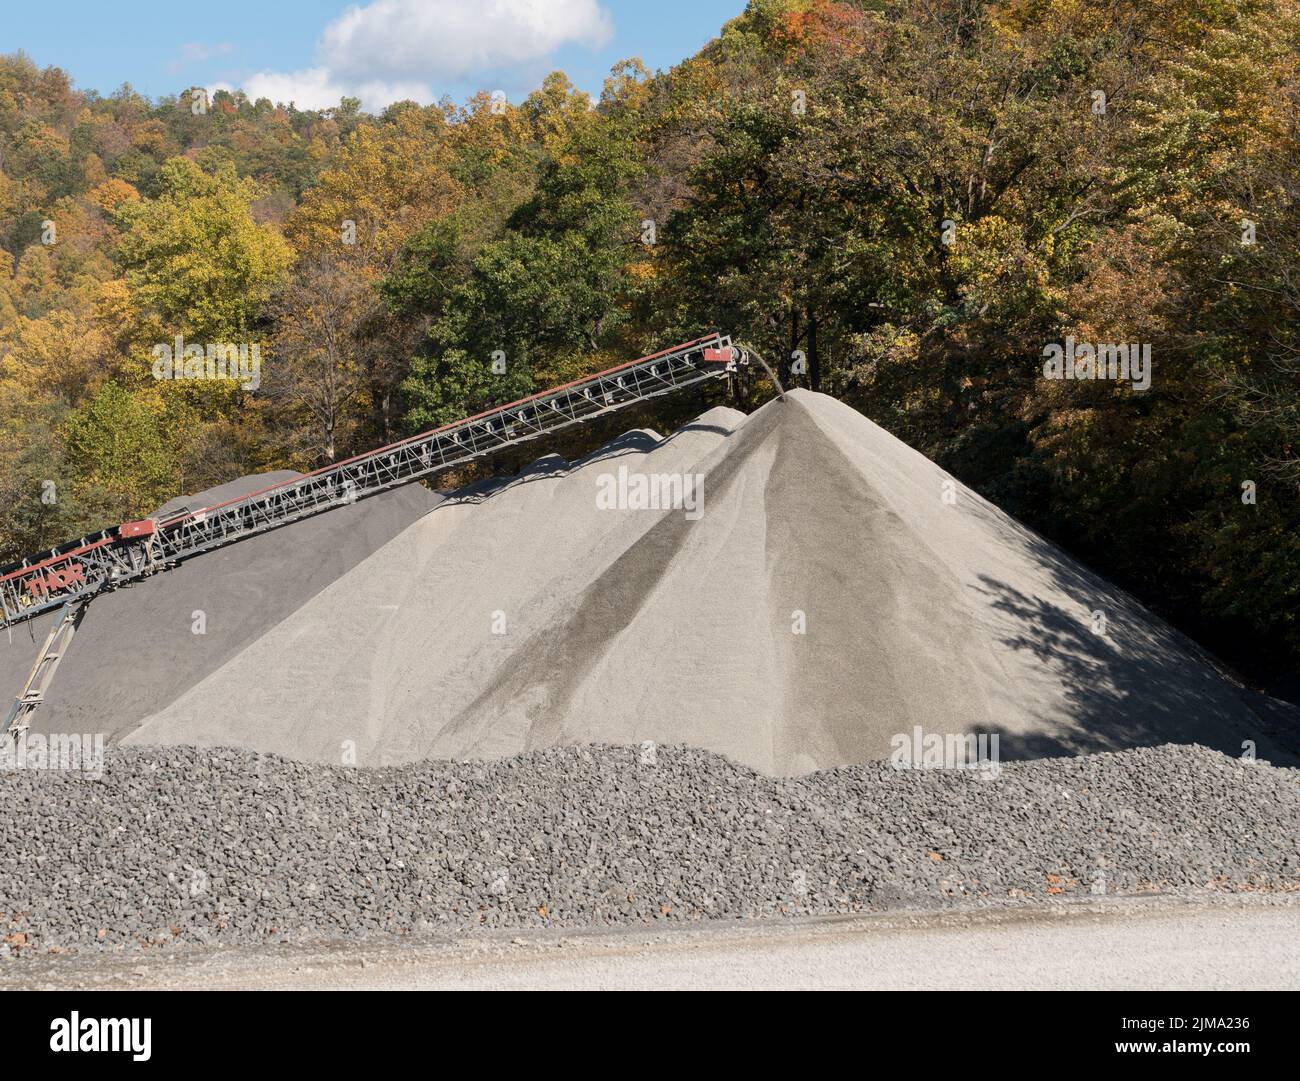 Limestone or crushed stone factory in wooded valley Stock Photo